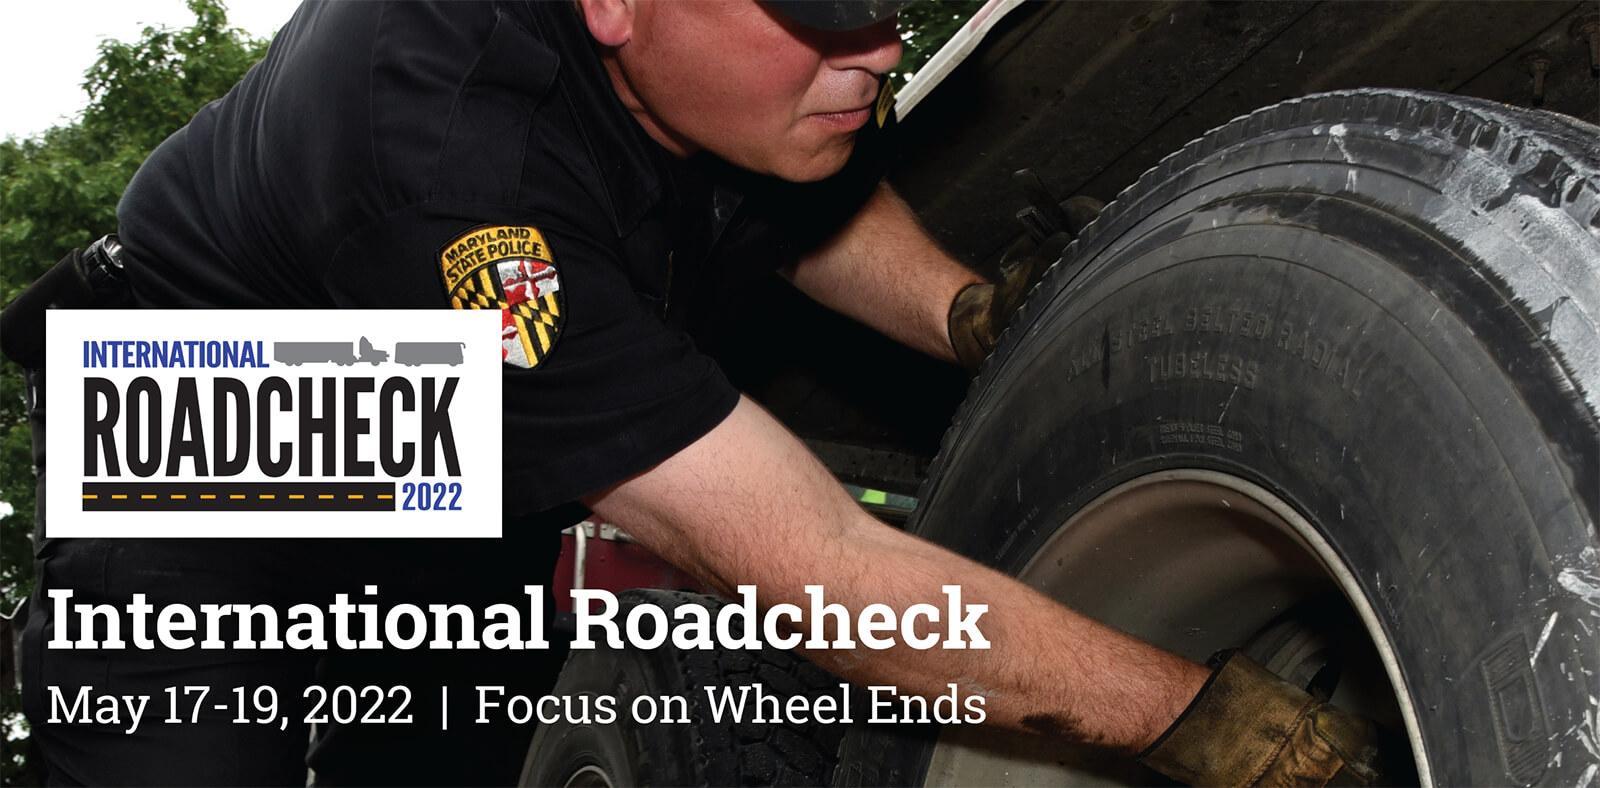 Annual roadcheck to focus on wheel ends